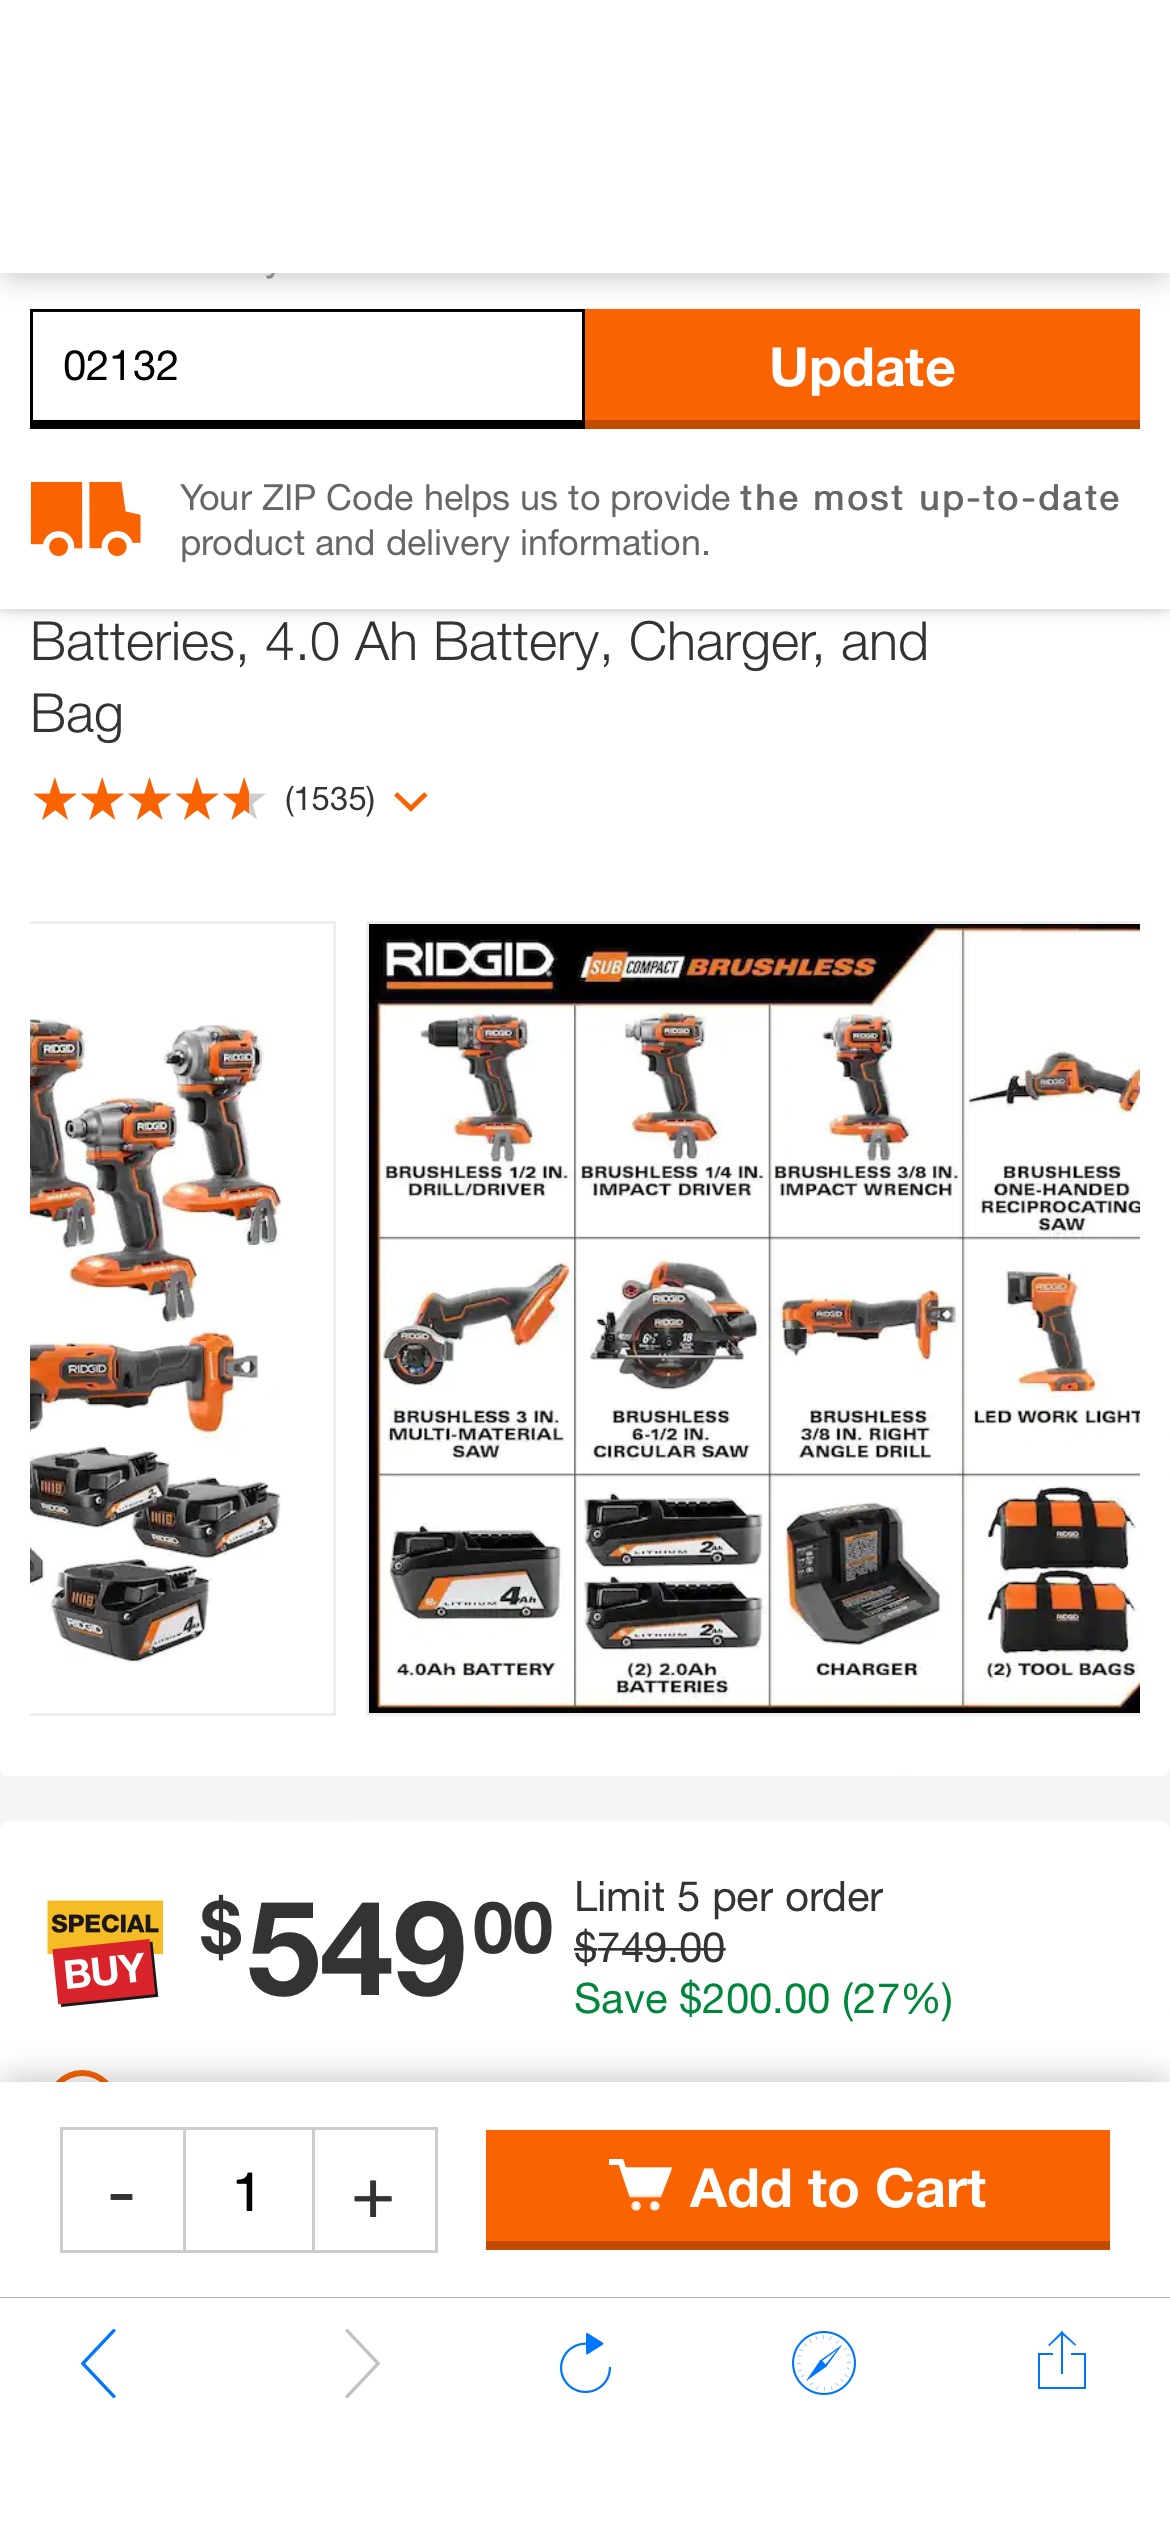 RIDGID 18V SubCompact Brushless Cordless 8-Tool Combo Kit with (2) 2.0 Ah Batteries, 4.0 Ah Battery, Charger, and Bag